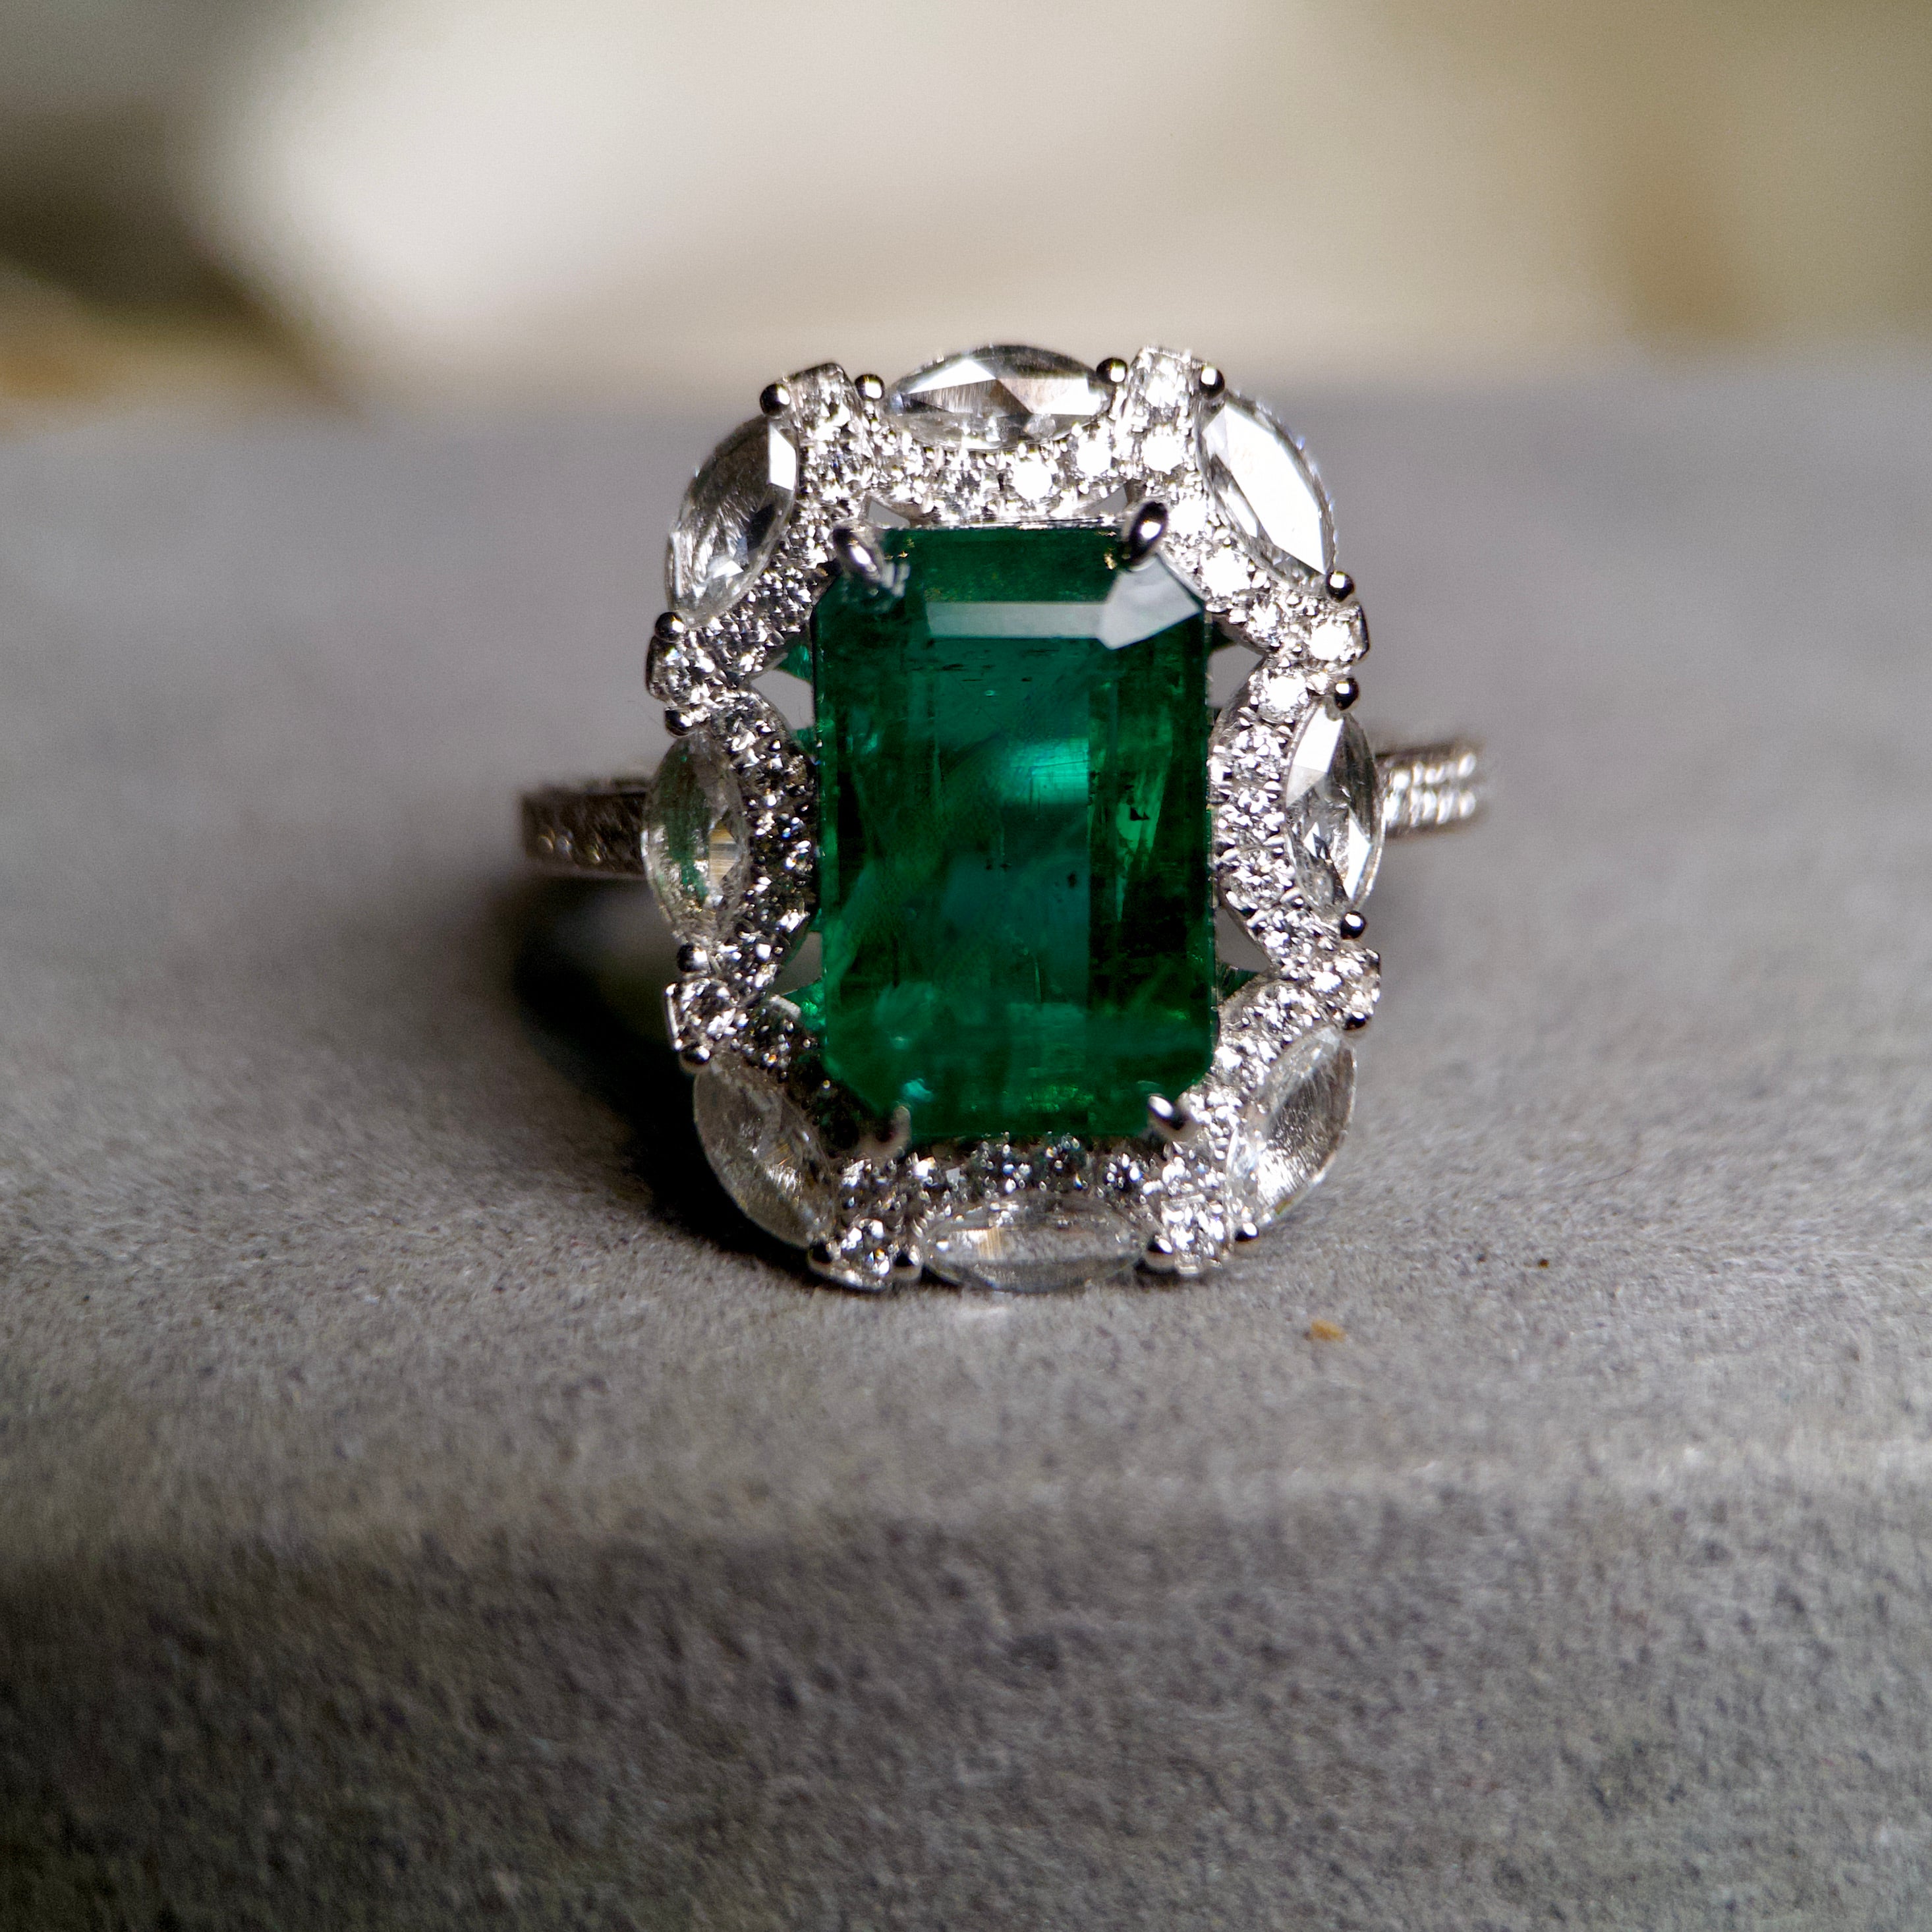 This a stunning Emerald and Diamond ring, with not only highly saturated vivid green colour emerald, but also, the tone of the emarald is on the brighter side and combining with the open back setting it really outshines others Emerald of the same